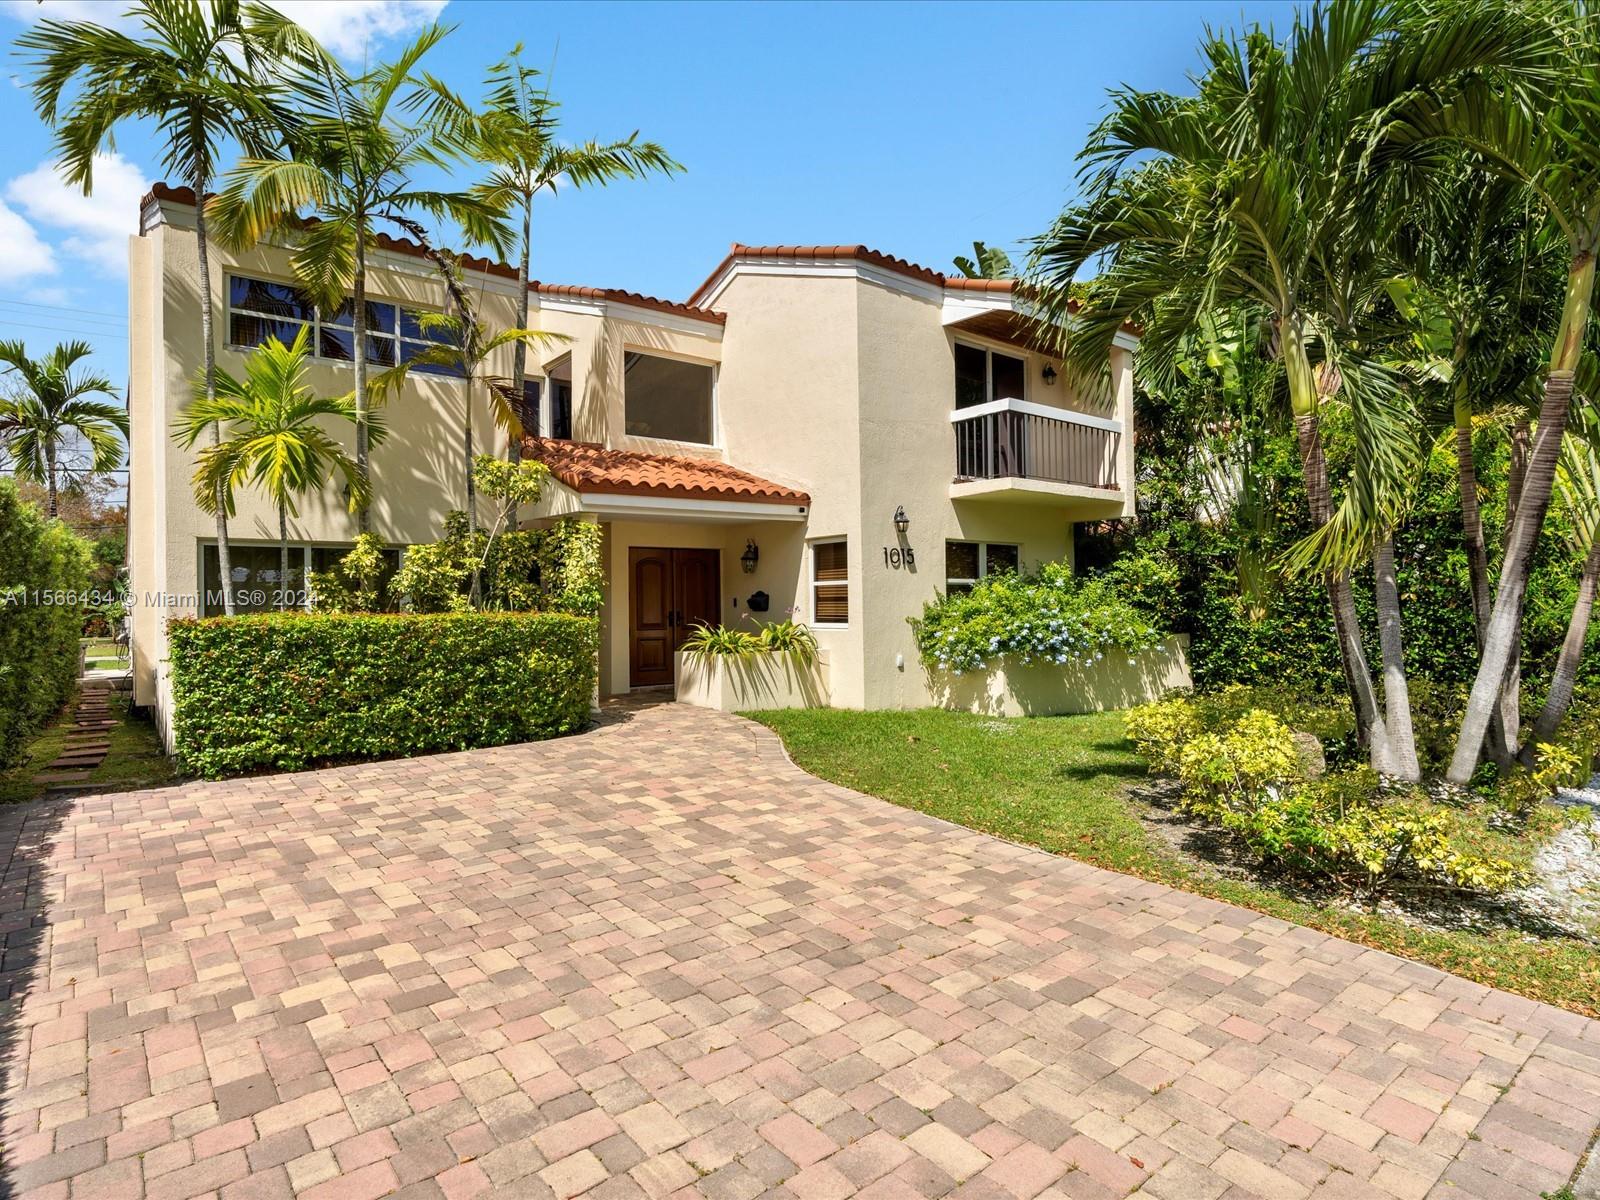 Property for Sale at 1015 Venetia Ave, Coral Gables, Broward County, Florida - Bedrooms: 5 
Bathrooms: 4  - $1,899,999